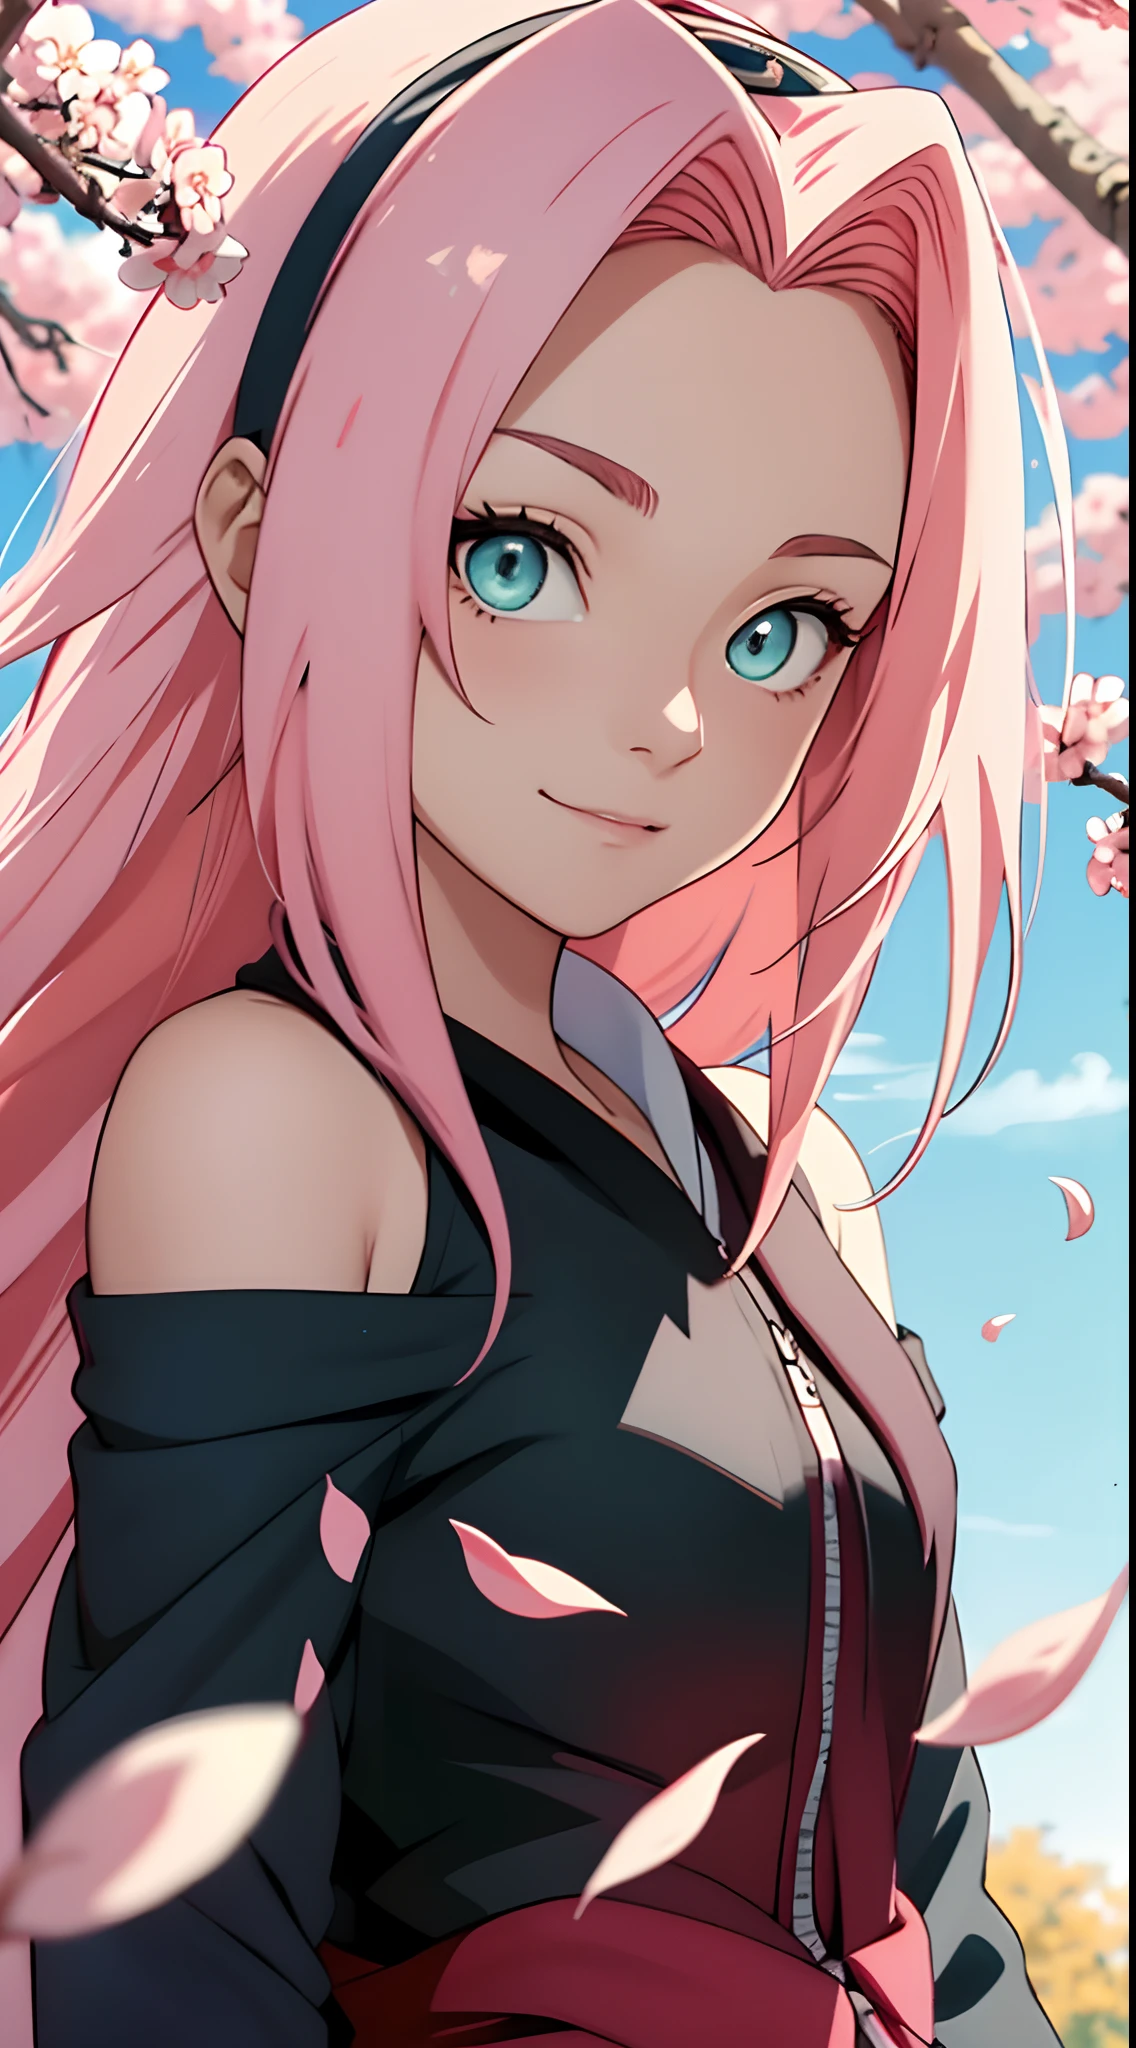 tmasterpiece， Best quality at best， 1girll， Sakura Haruno， Large breasts，Off-the-shoulder attire，（close-up all over the body)，Raised sexy，is shy，ssmile，with pink hair， long whitr hair， （Green eyeballs:1.4)， Forehead protection， the cherry trees，Cherry blossoms flying，ninja clothes，In front of blue sky with soft cream cone, Splash art anime , Anime moe art style, a beautiful anime portrait, beautiful anime art style, Digital anime art!!